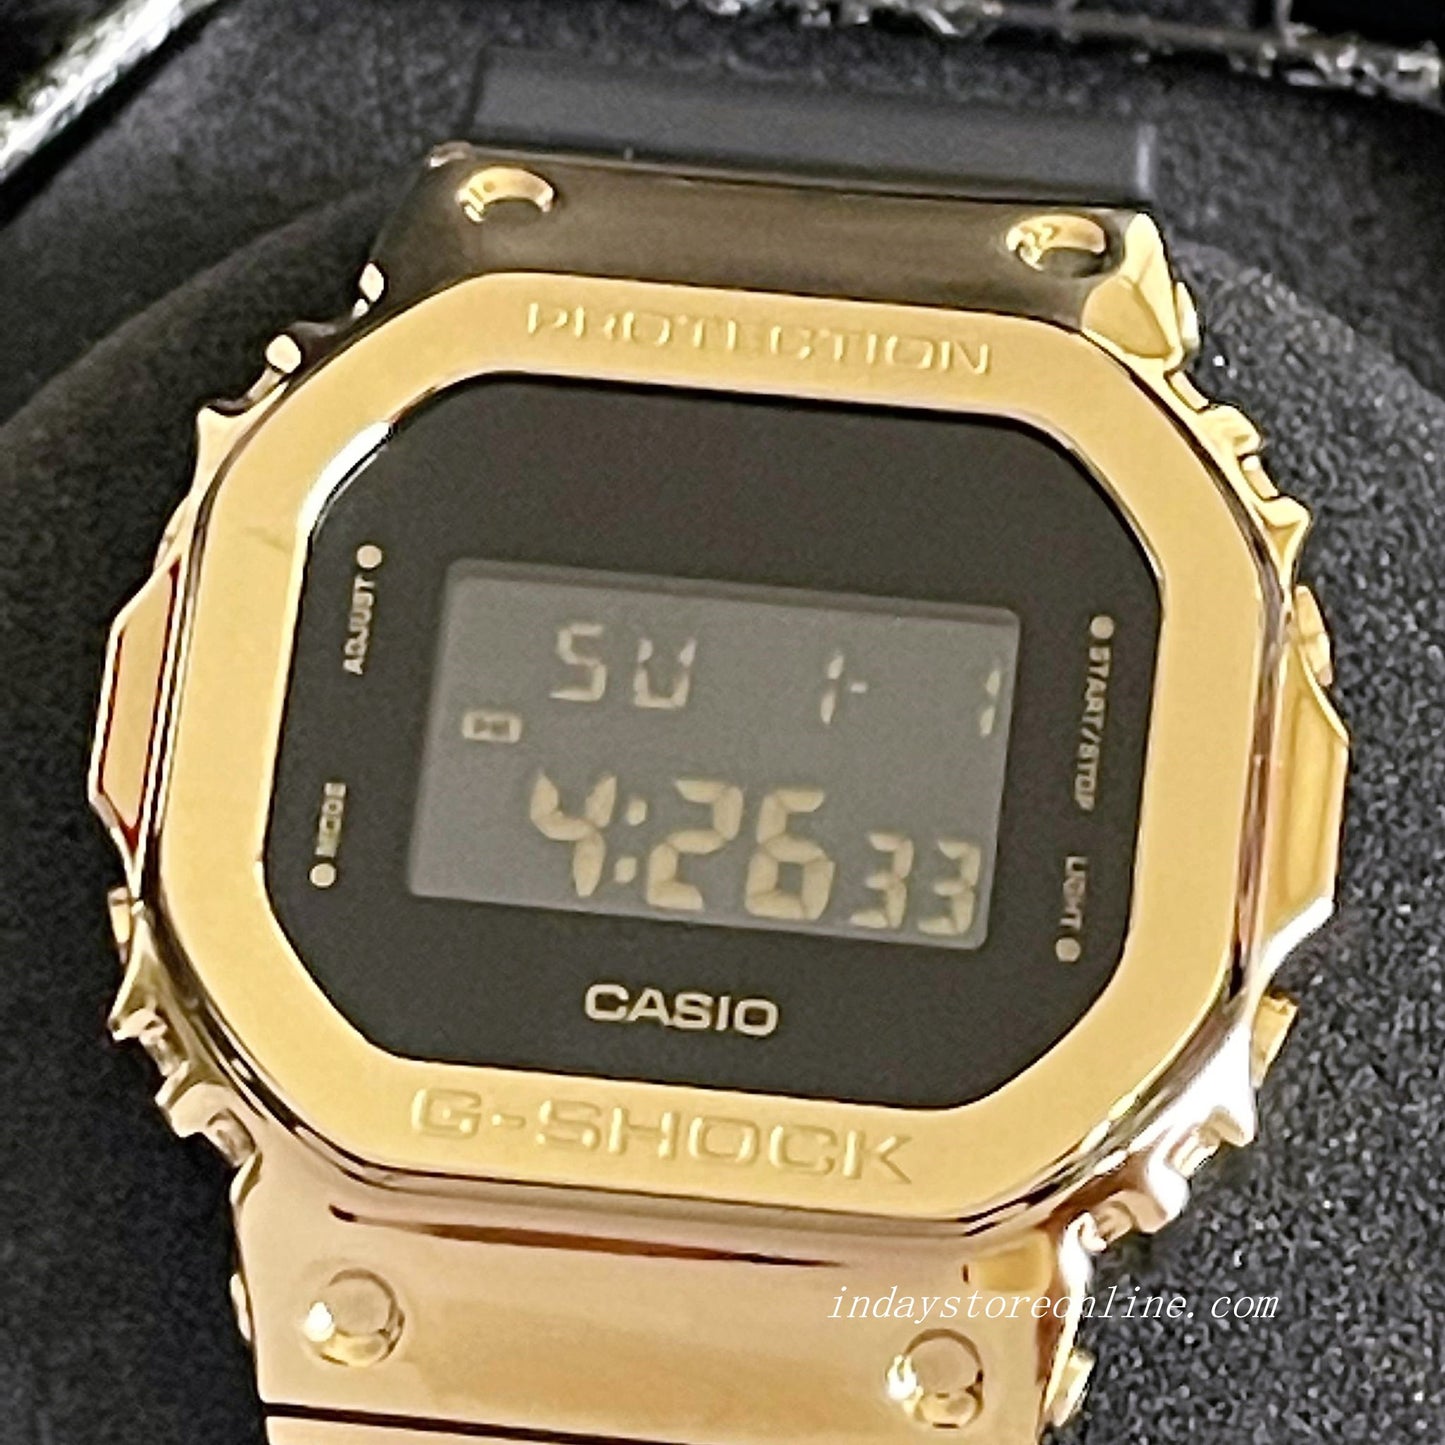 Casio G-Shock Men's Watch GM-5600G-9 Digital 5600 Series Black and Gold Color